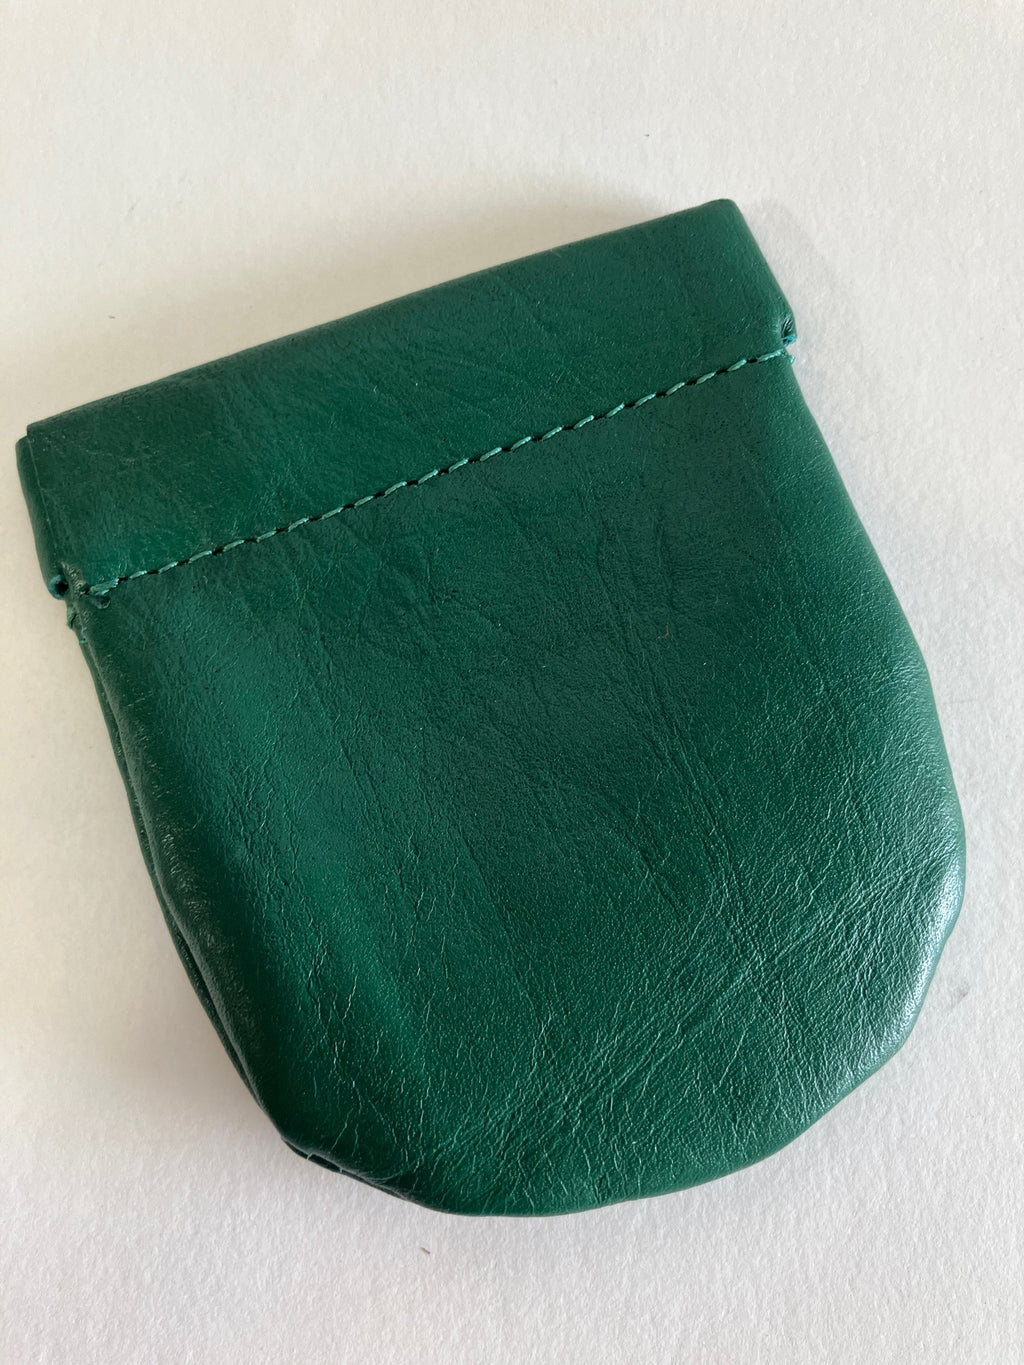 SAMPLE Leather wallet, squeeze frame coin purse EMERALD green leather